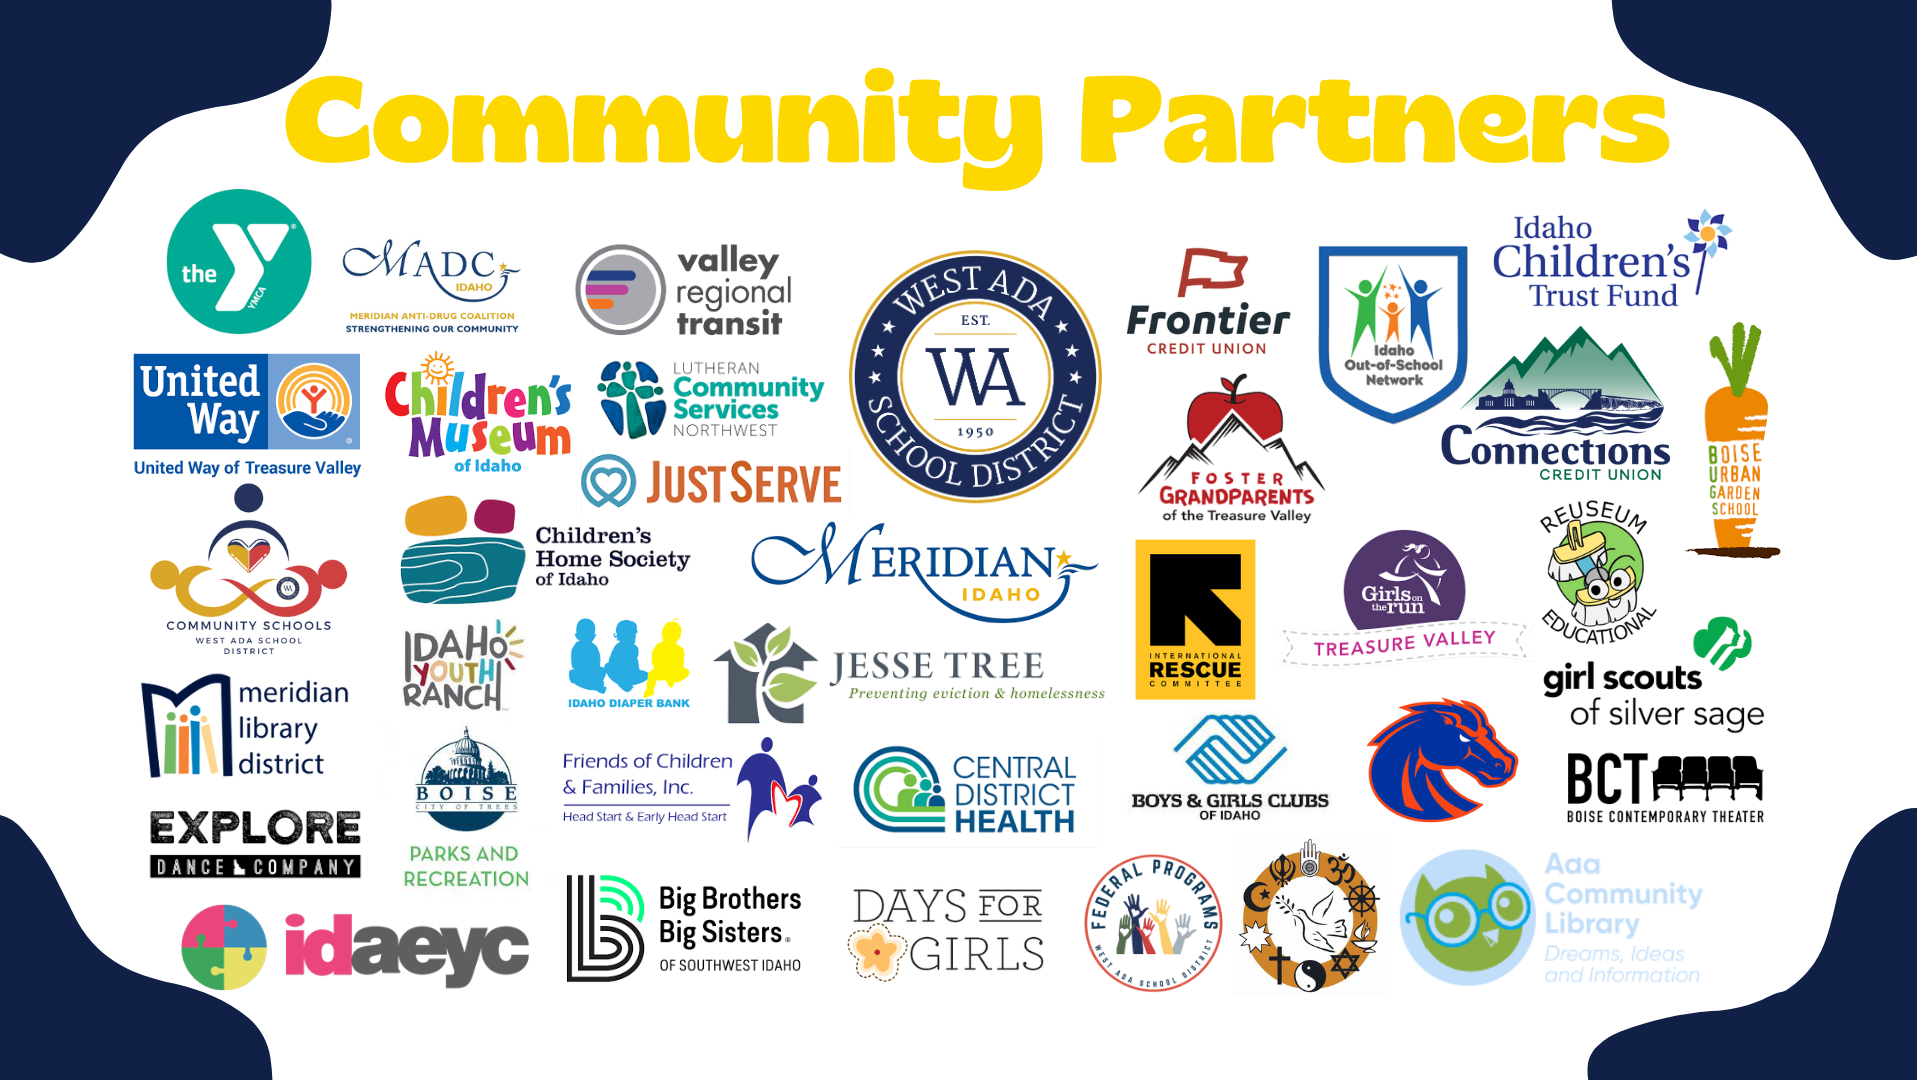 image of various company logos, including The Salvation Army, Reuseum Educational, Idaho Department of Education, Medirian Foodbank, Meridian Library District, Deseret Industries, WASD Education Foundation, St. Vincent de Paul, Idaho Diaper Bank, College of Western Idaho, Covenant Presbyterian Church, Just Serve, Geico, Walmart Foundation, Boys & Girls Club of Ada County, Full Circle Health, Solekids, Boise Contemporary Theater, United Way, Assistance League, Nike, Purposity, and Boise Parks & Recreation